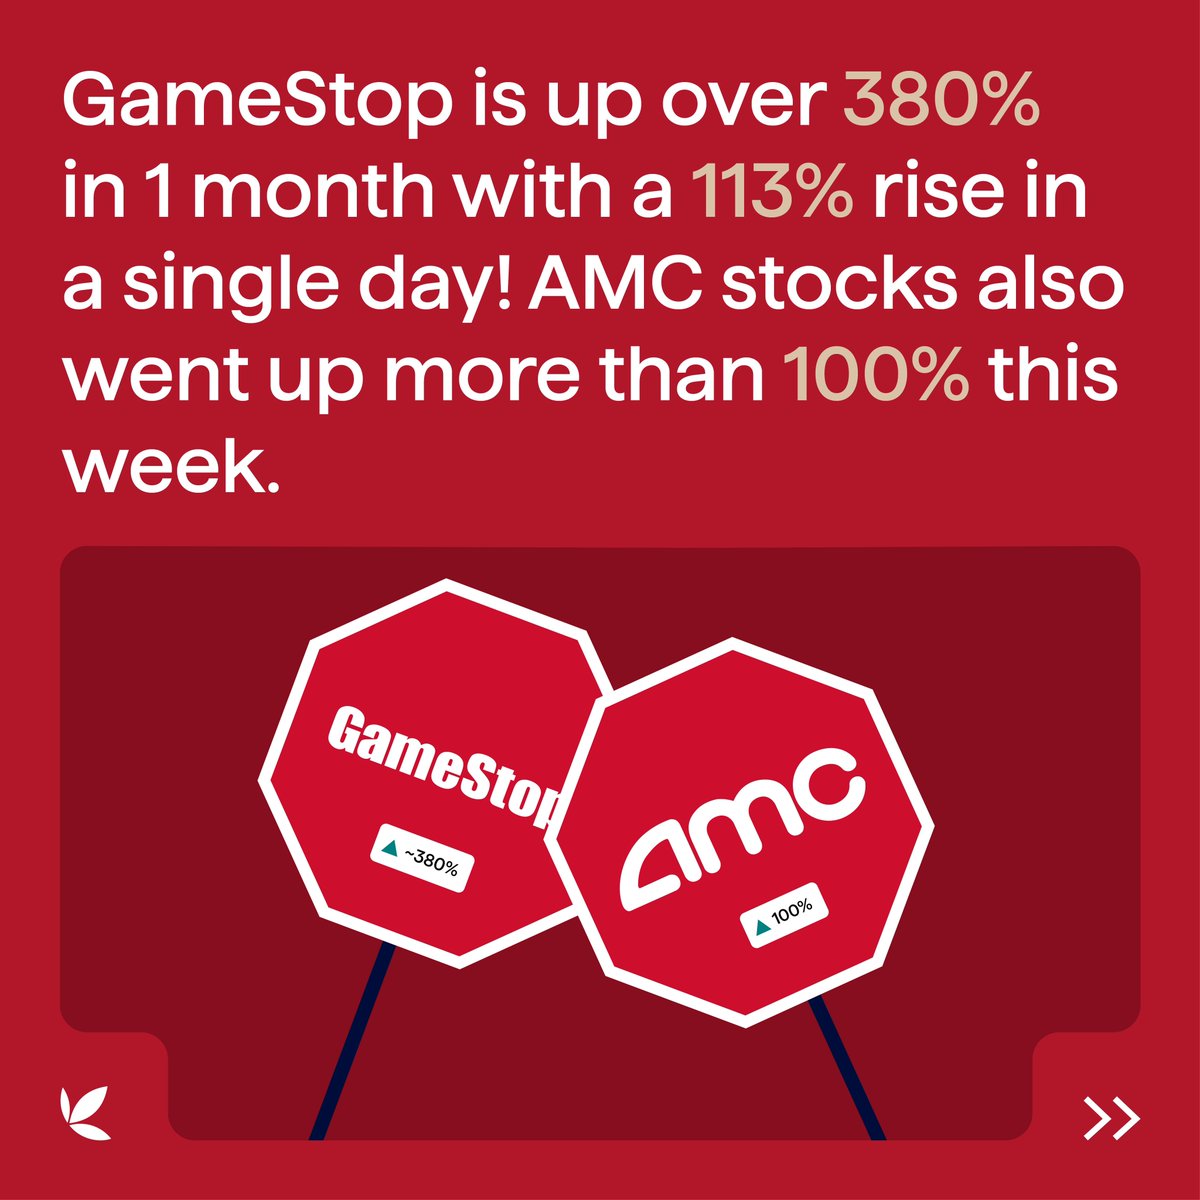 Have you seen the GameStop craze going on since last week? 

Tell us why these stocks ARE or ARE NOT in your portfolio right now. 

Let’s discuss! 

#Investing #StockMarket #GameStop #AMC